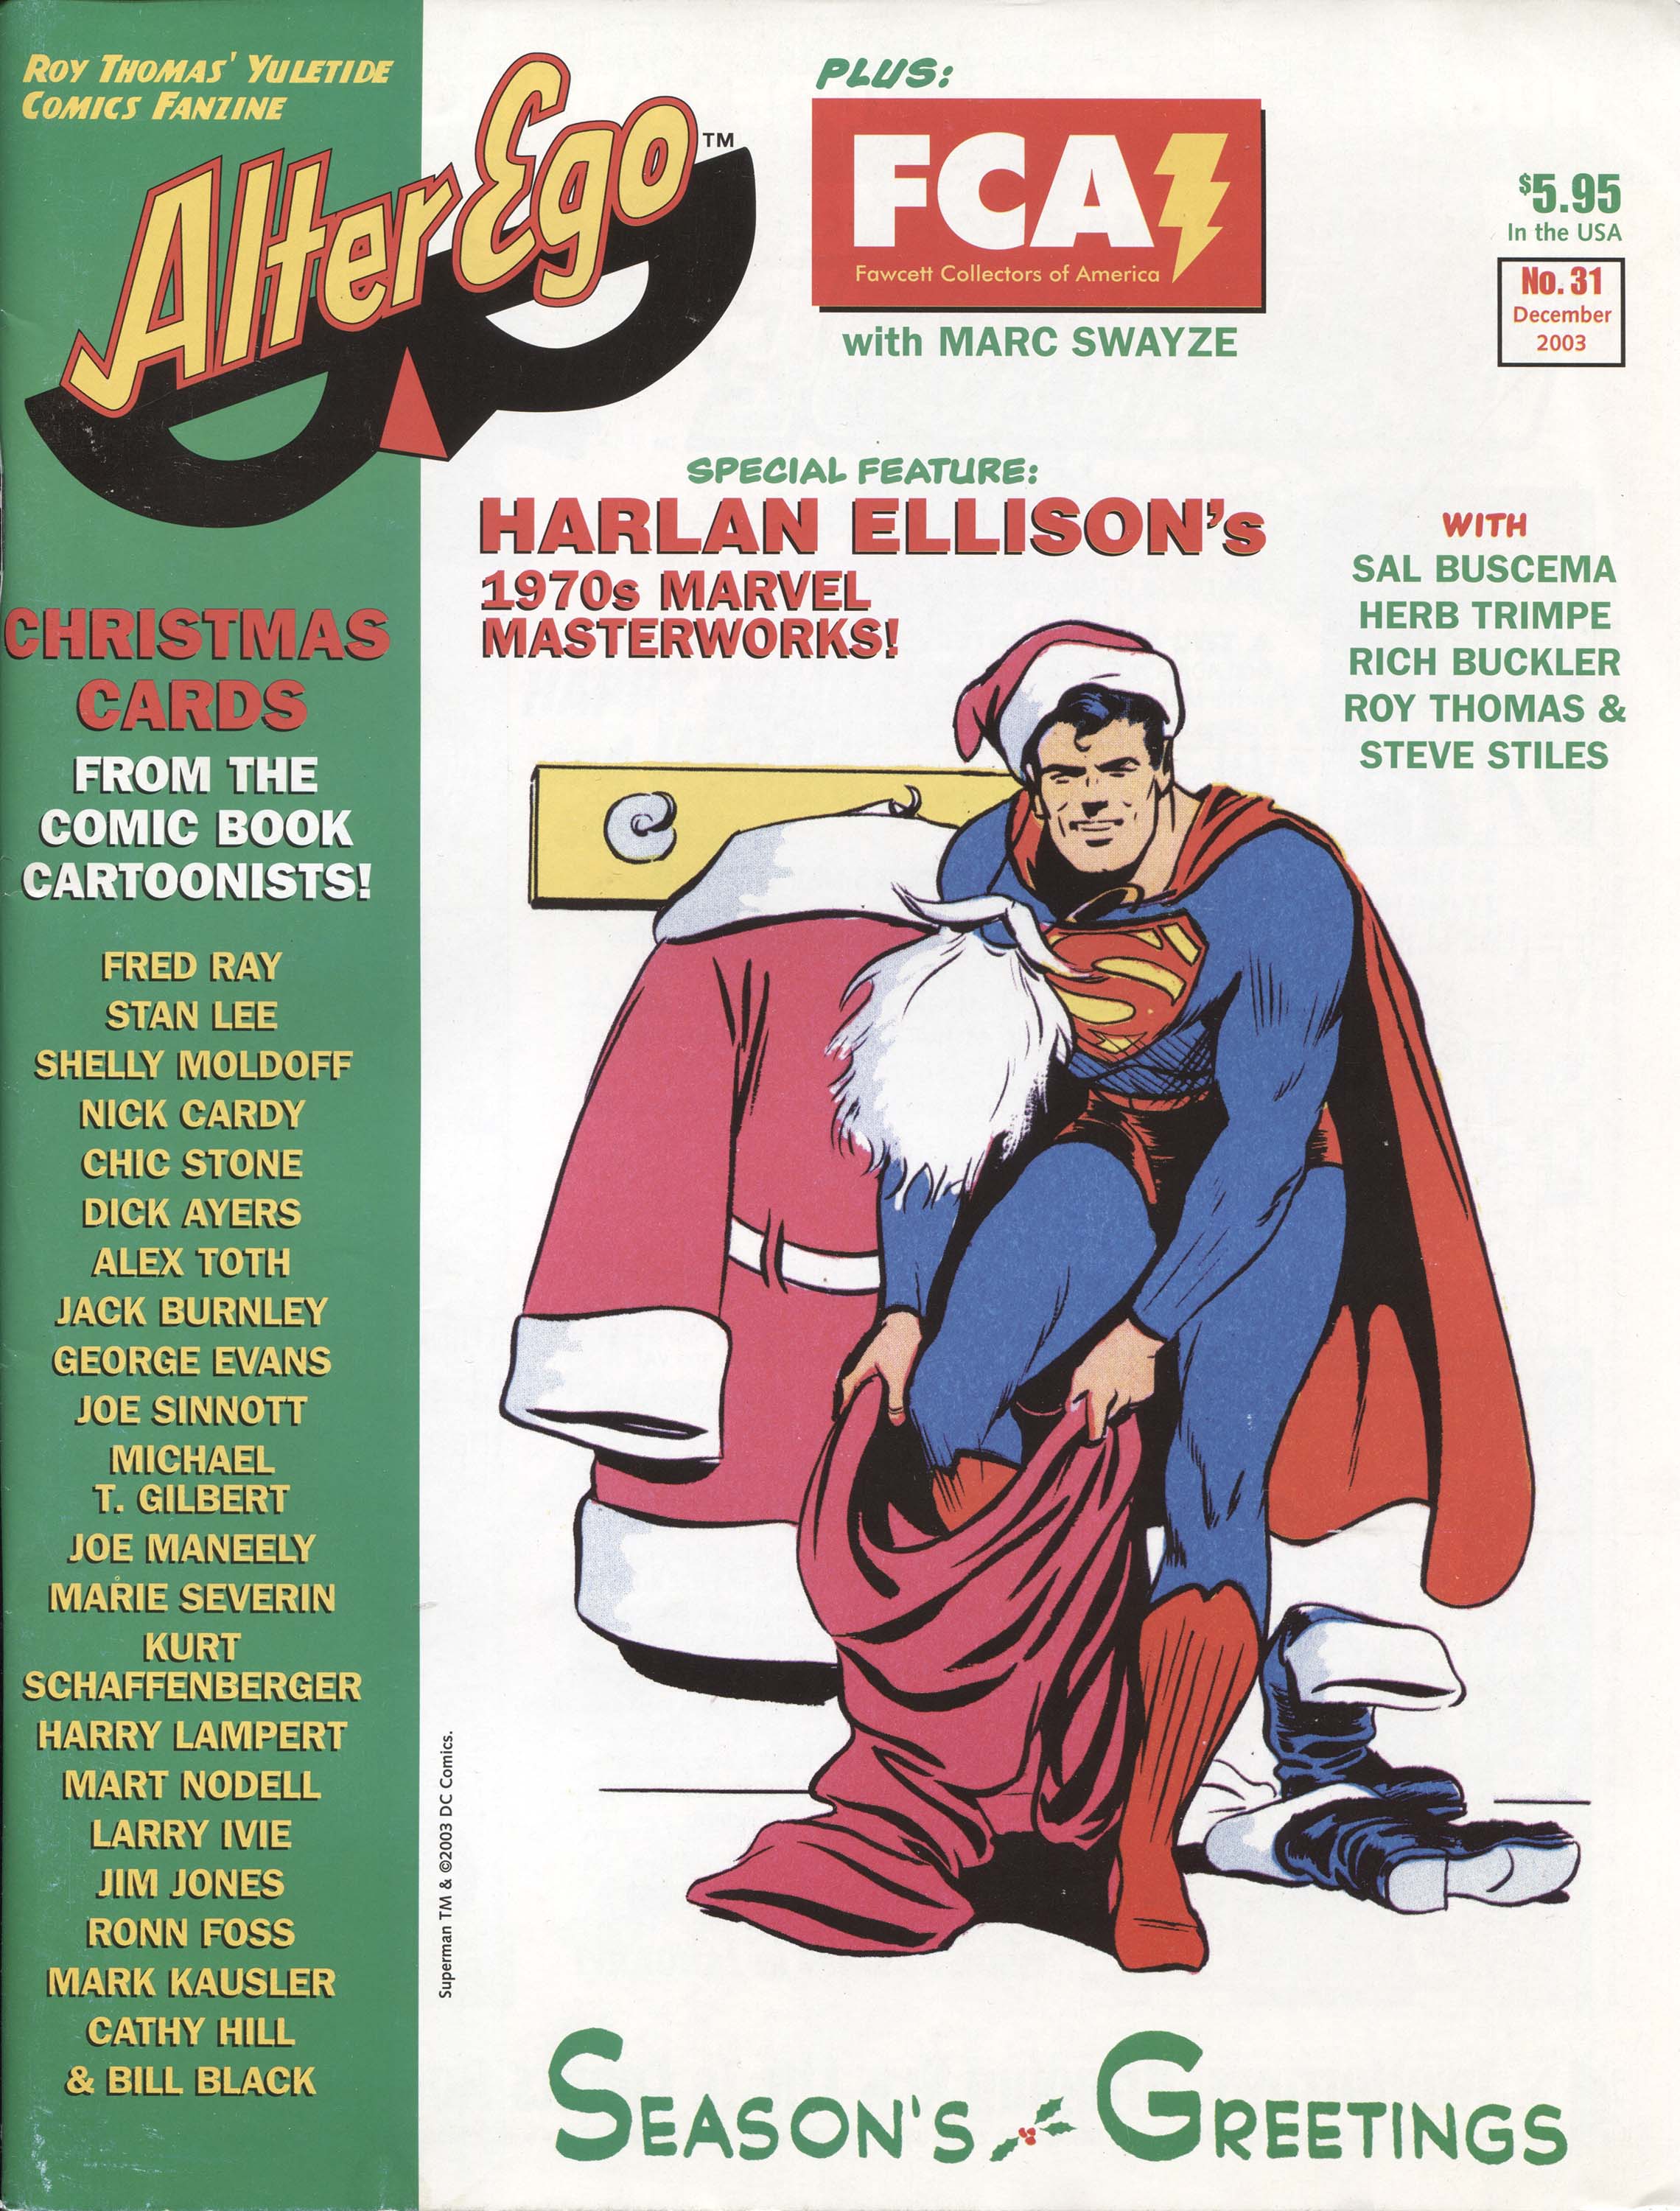 Alter Ego #31, cover, art by Fred Ray